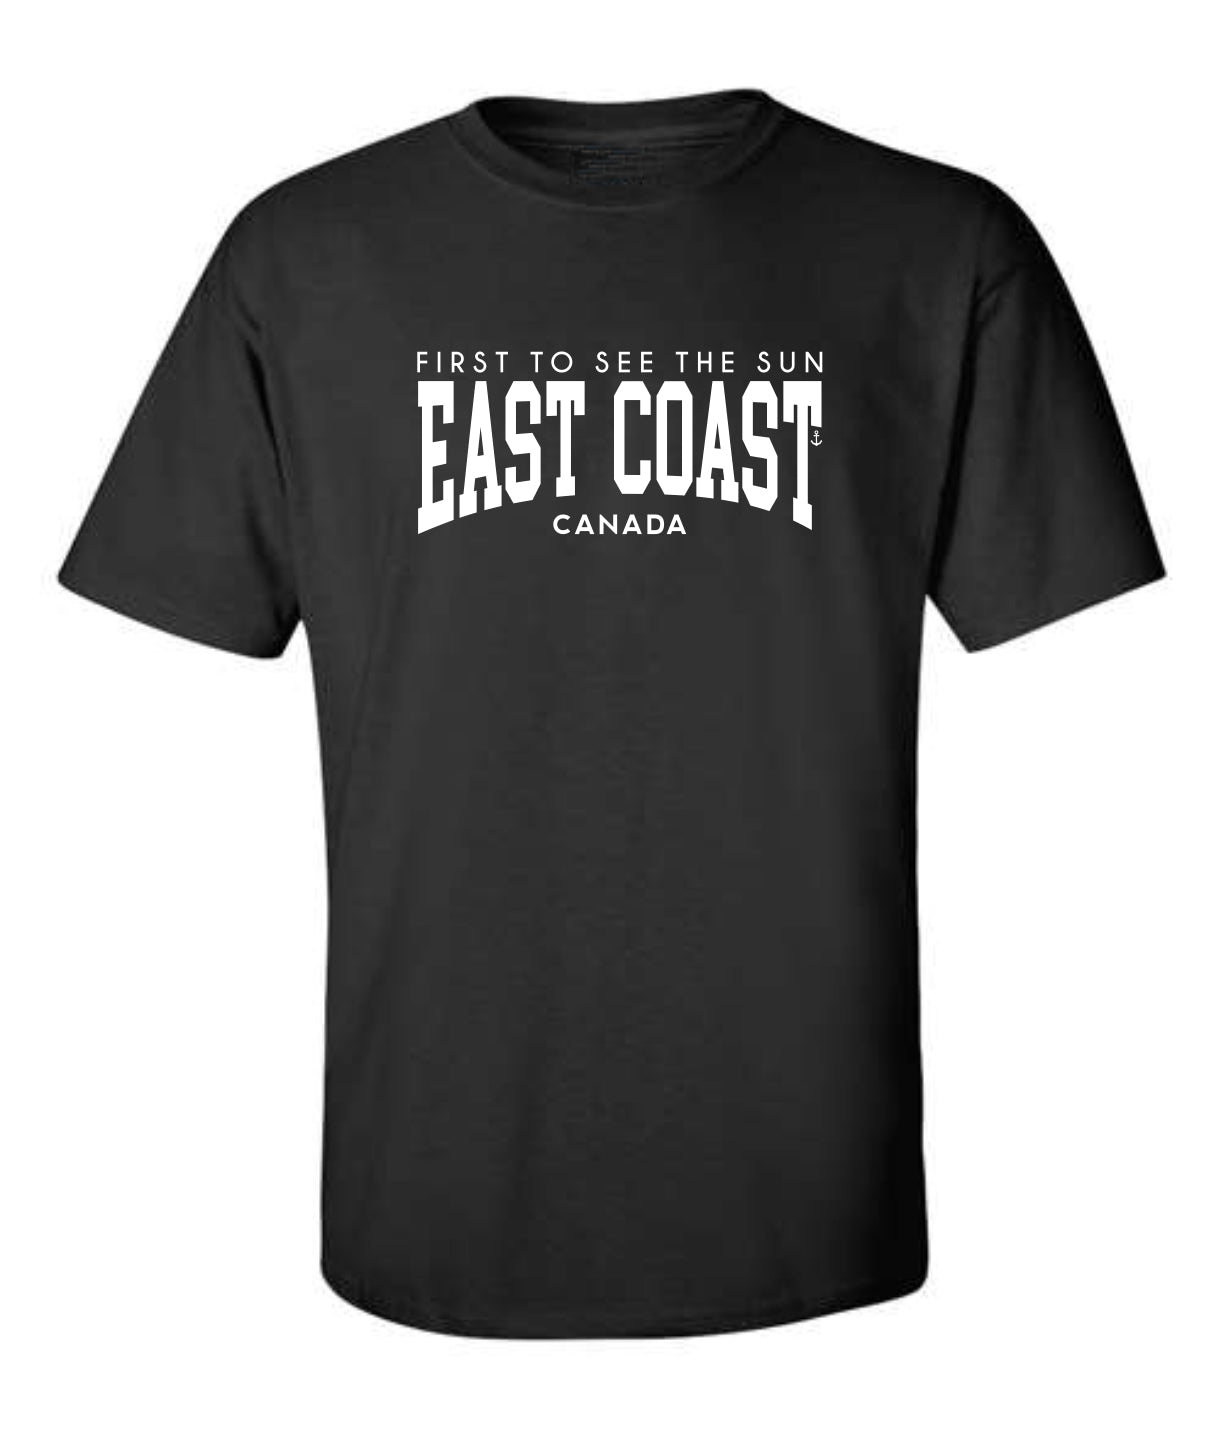 "East Coast - First To See The Sun" T-Shirt